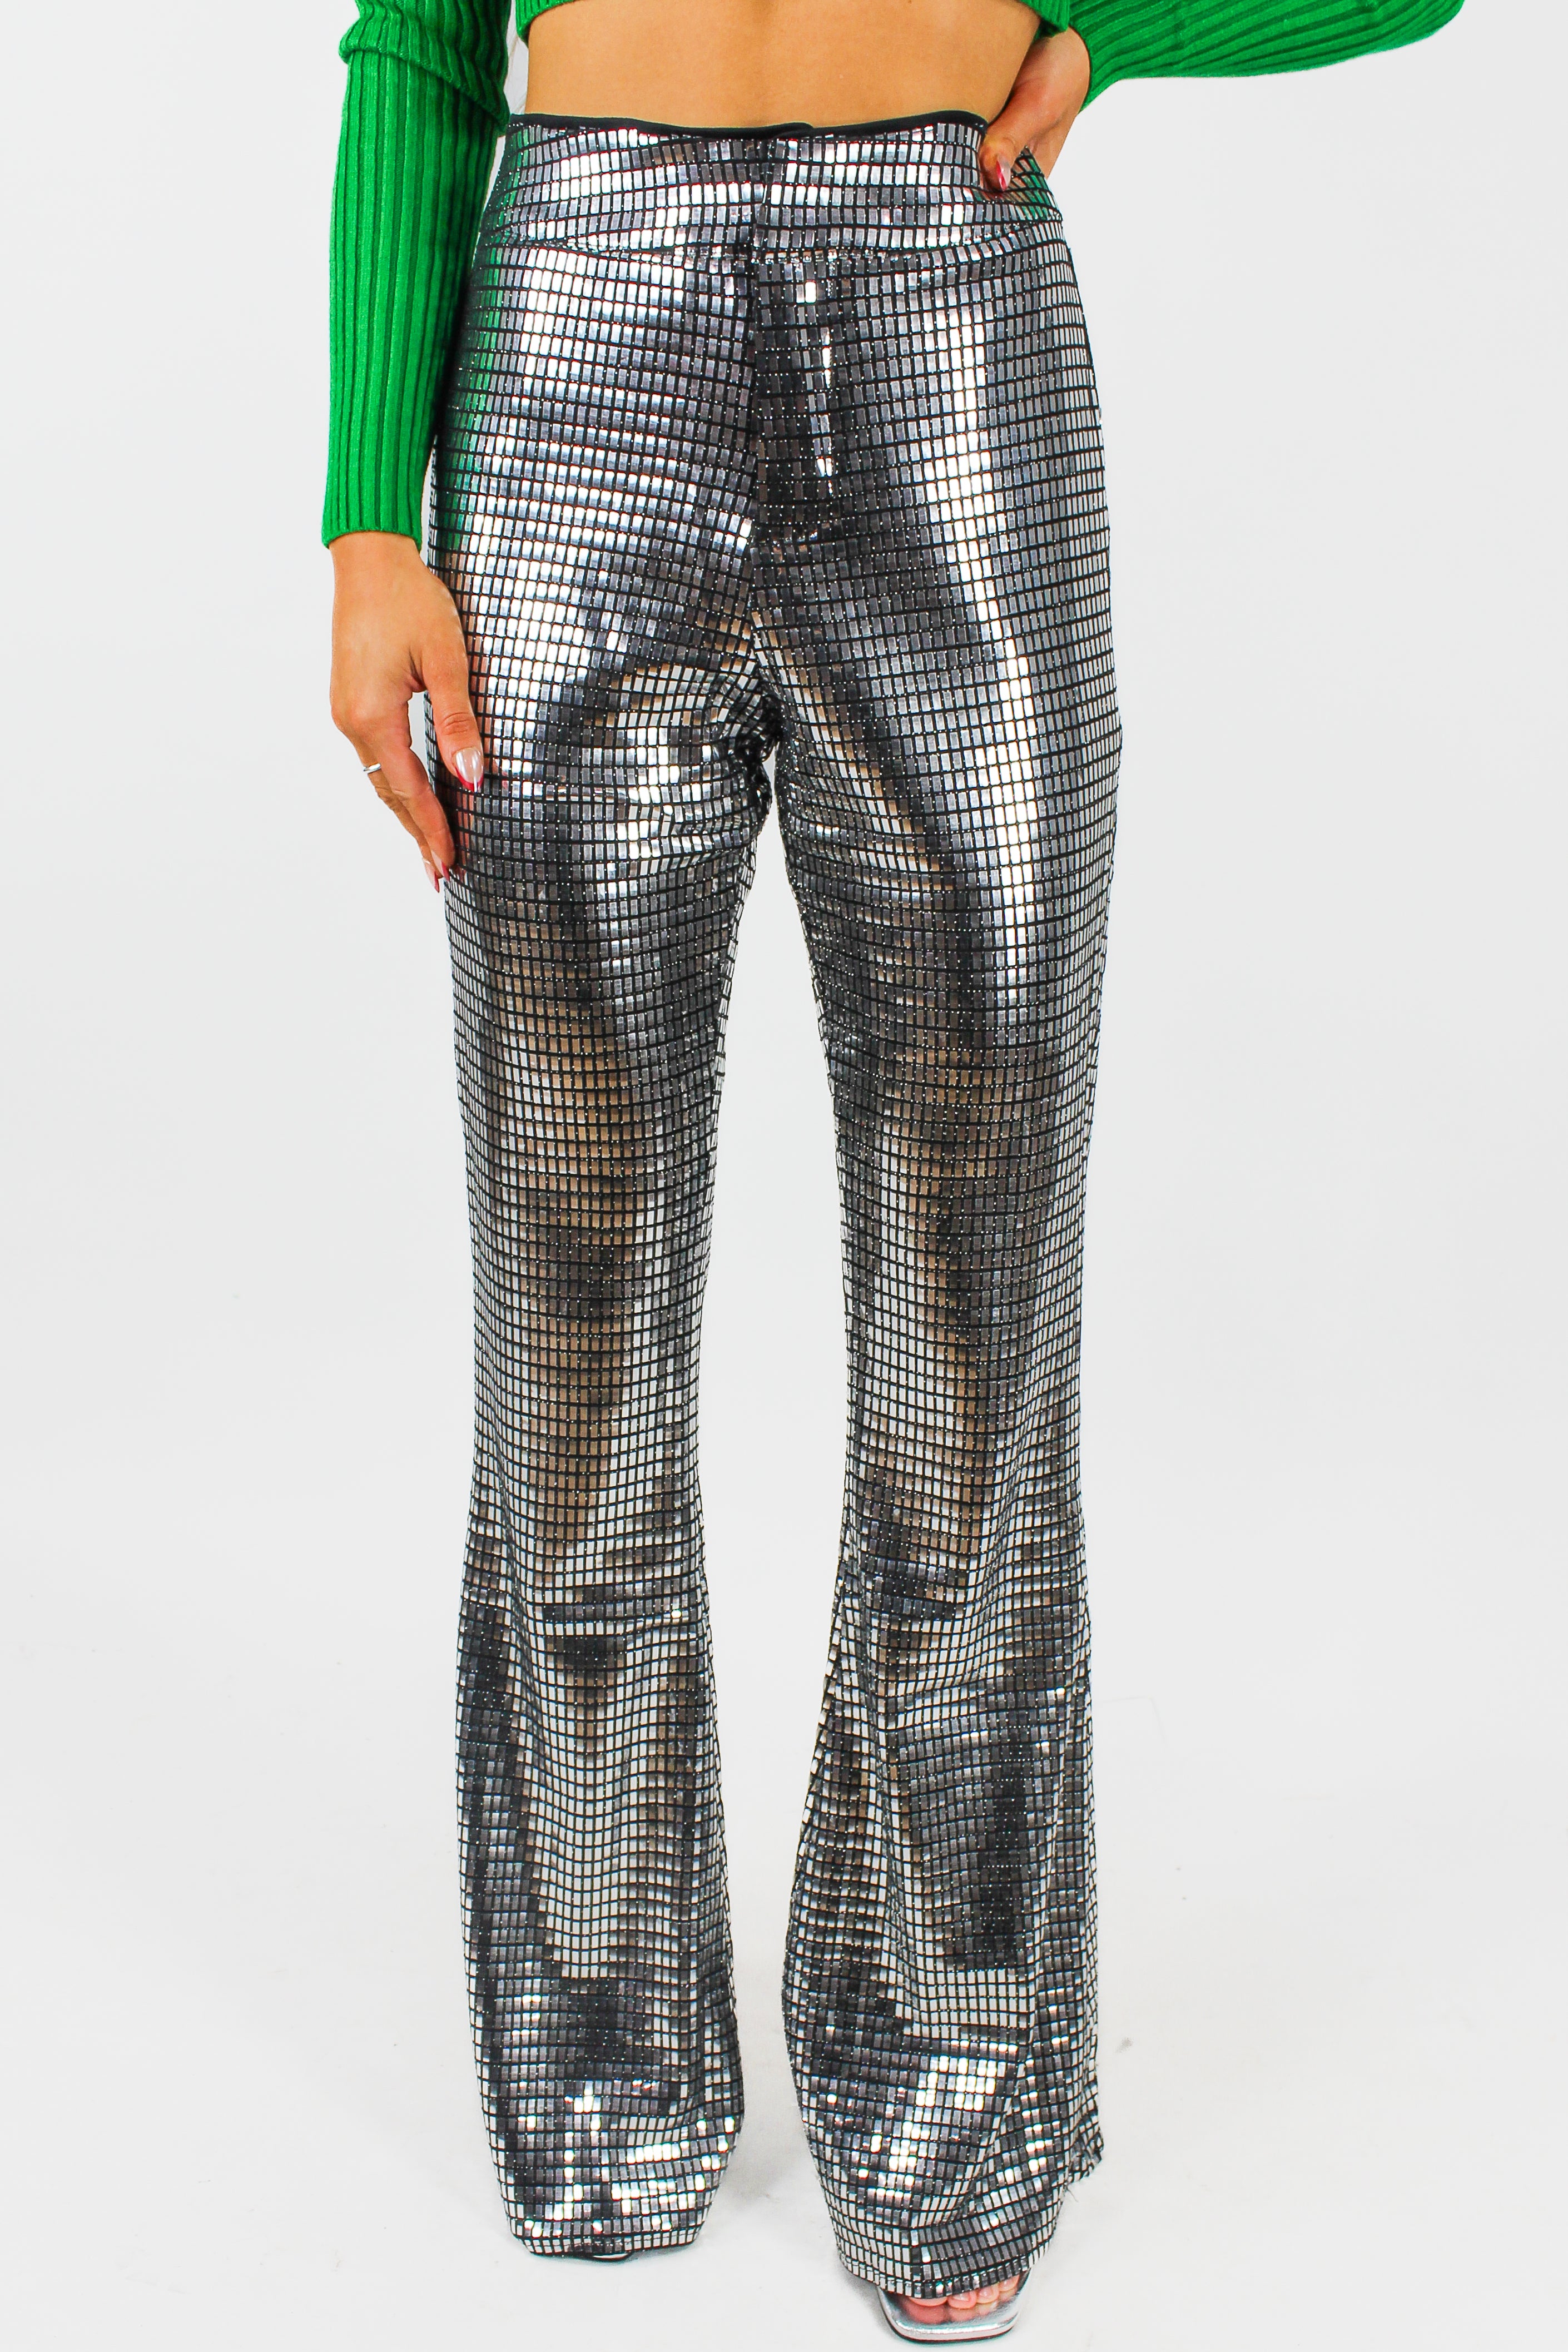 SEQUIN FLARE PANTS  Sequin flare pants, Sequins pants outfit